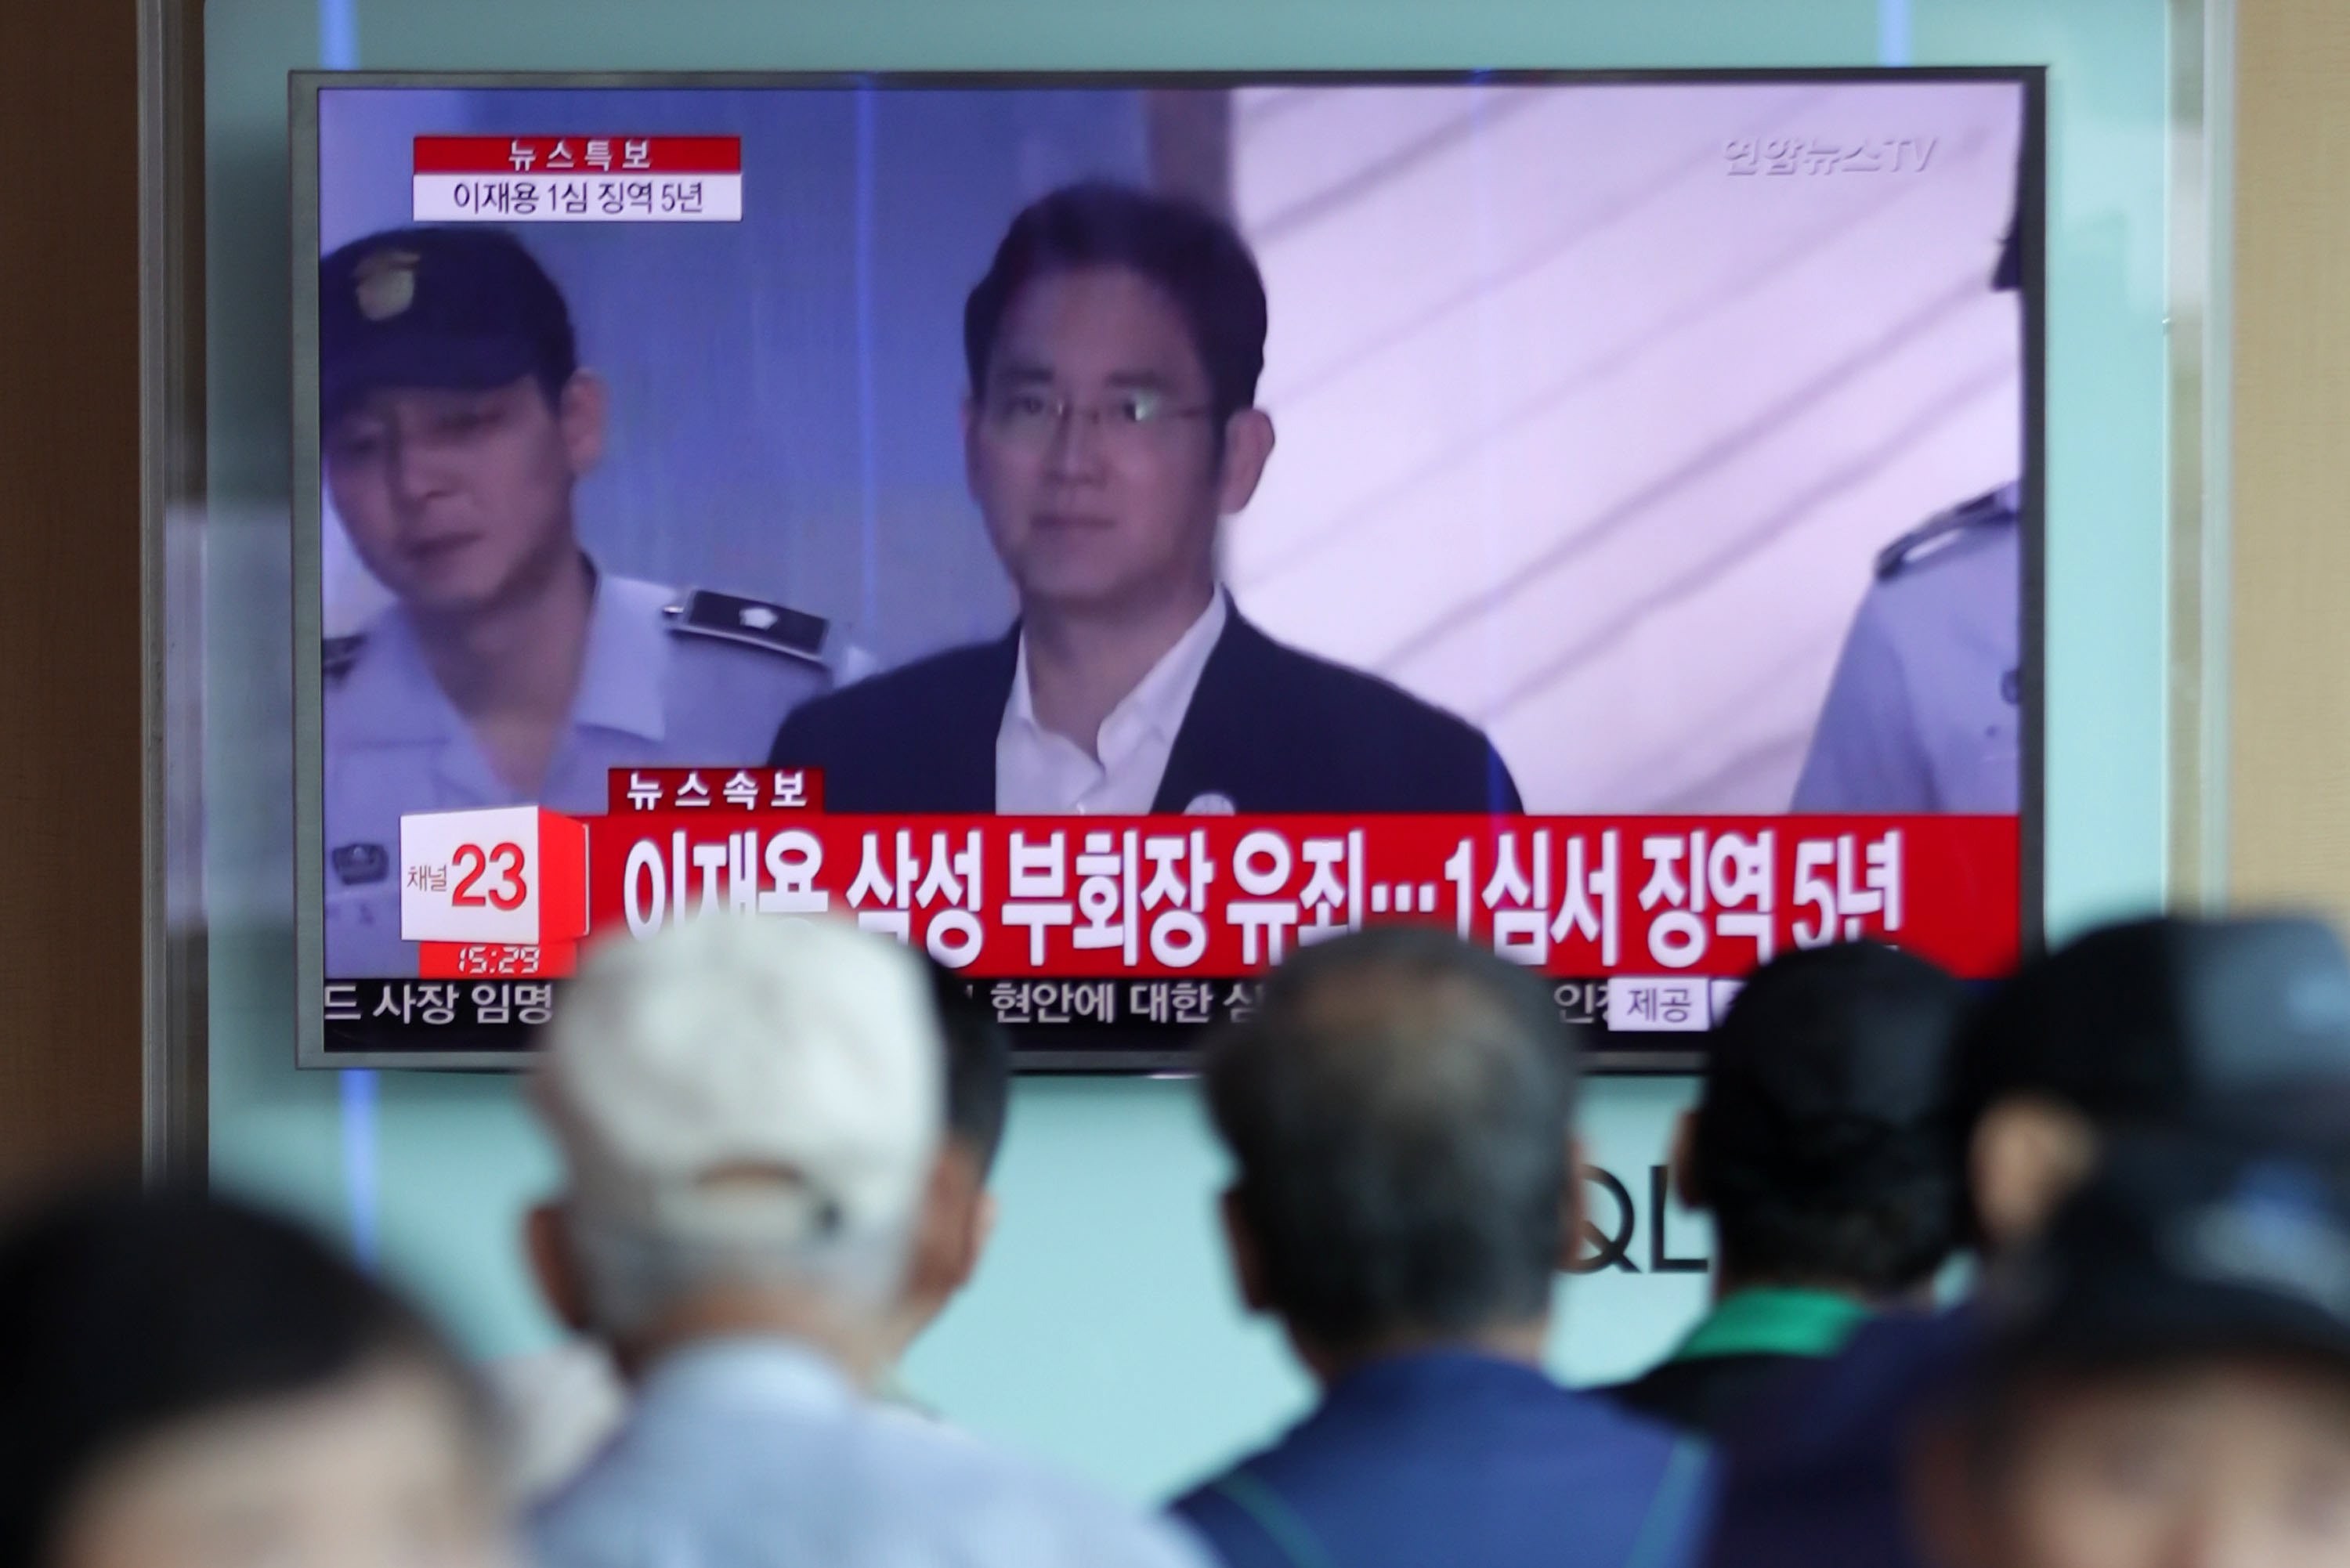 South Korean citizens watch coverage of the sentencing hearing for Samsung Electronics vice-chairman Lee Jae-yong in Seoul on Friday. Lee was jailed for five years after being convicted of bribery and other charges. Photo: Yonhap